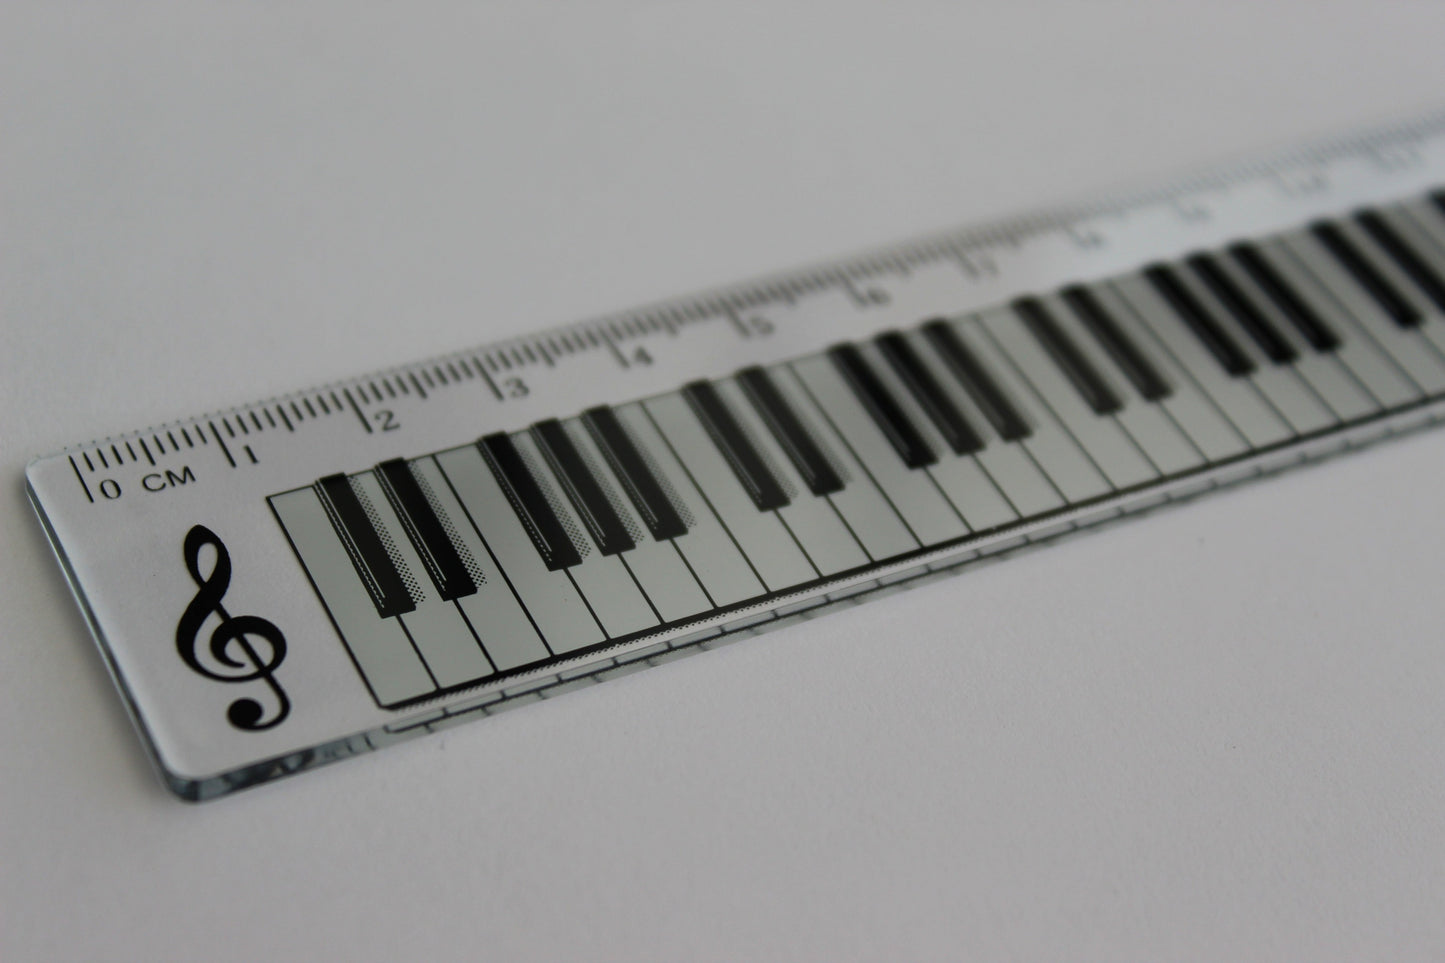 Clear ruler with a piano keyboard and treble clef design.